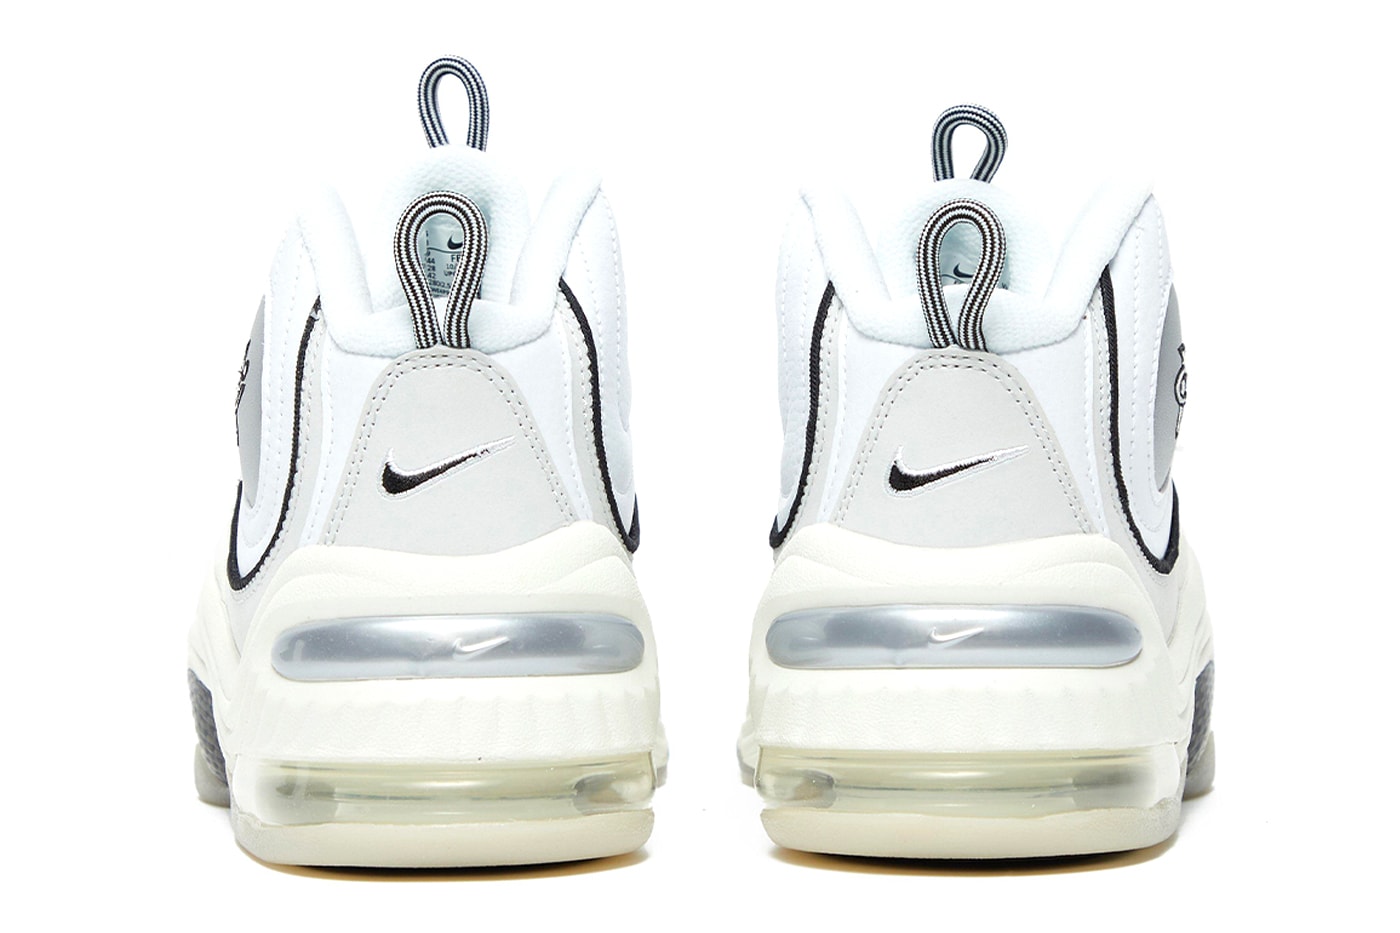 Nike Air Max Penny 2 emb first look white leather black chrome release info date price